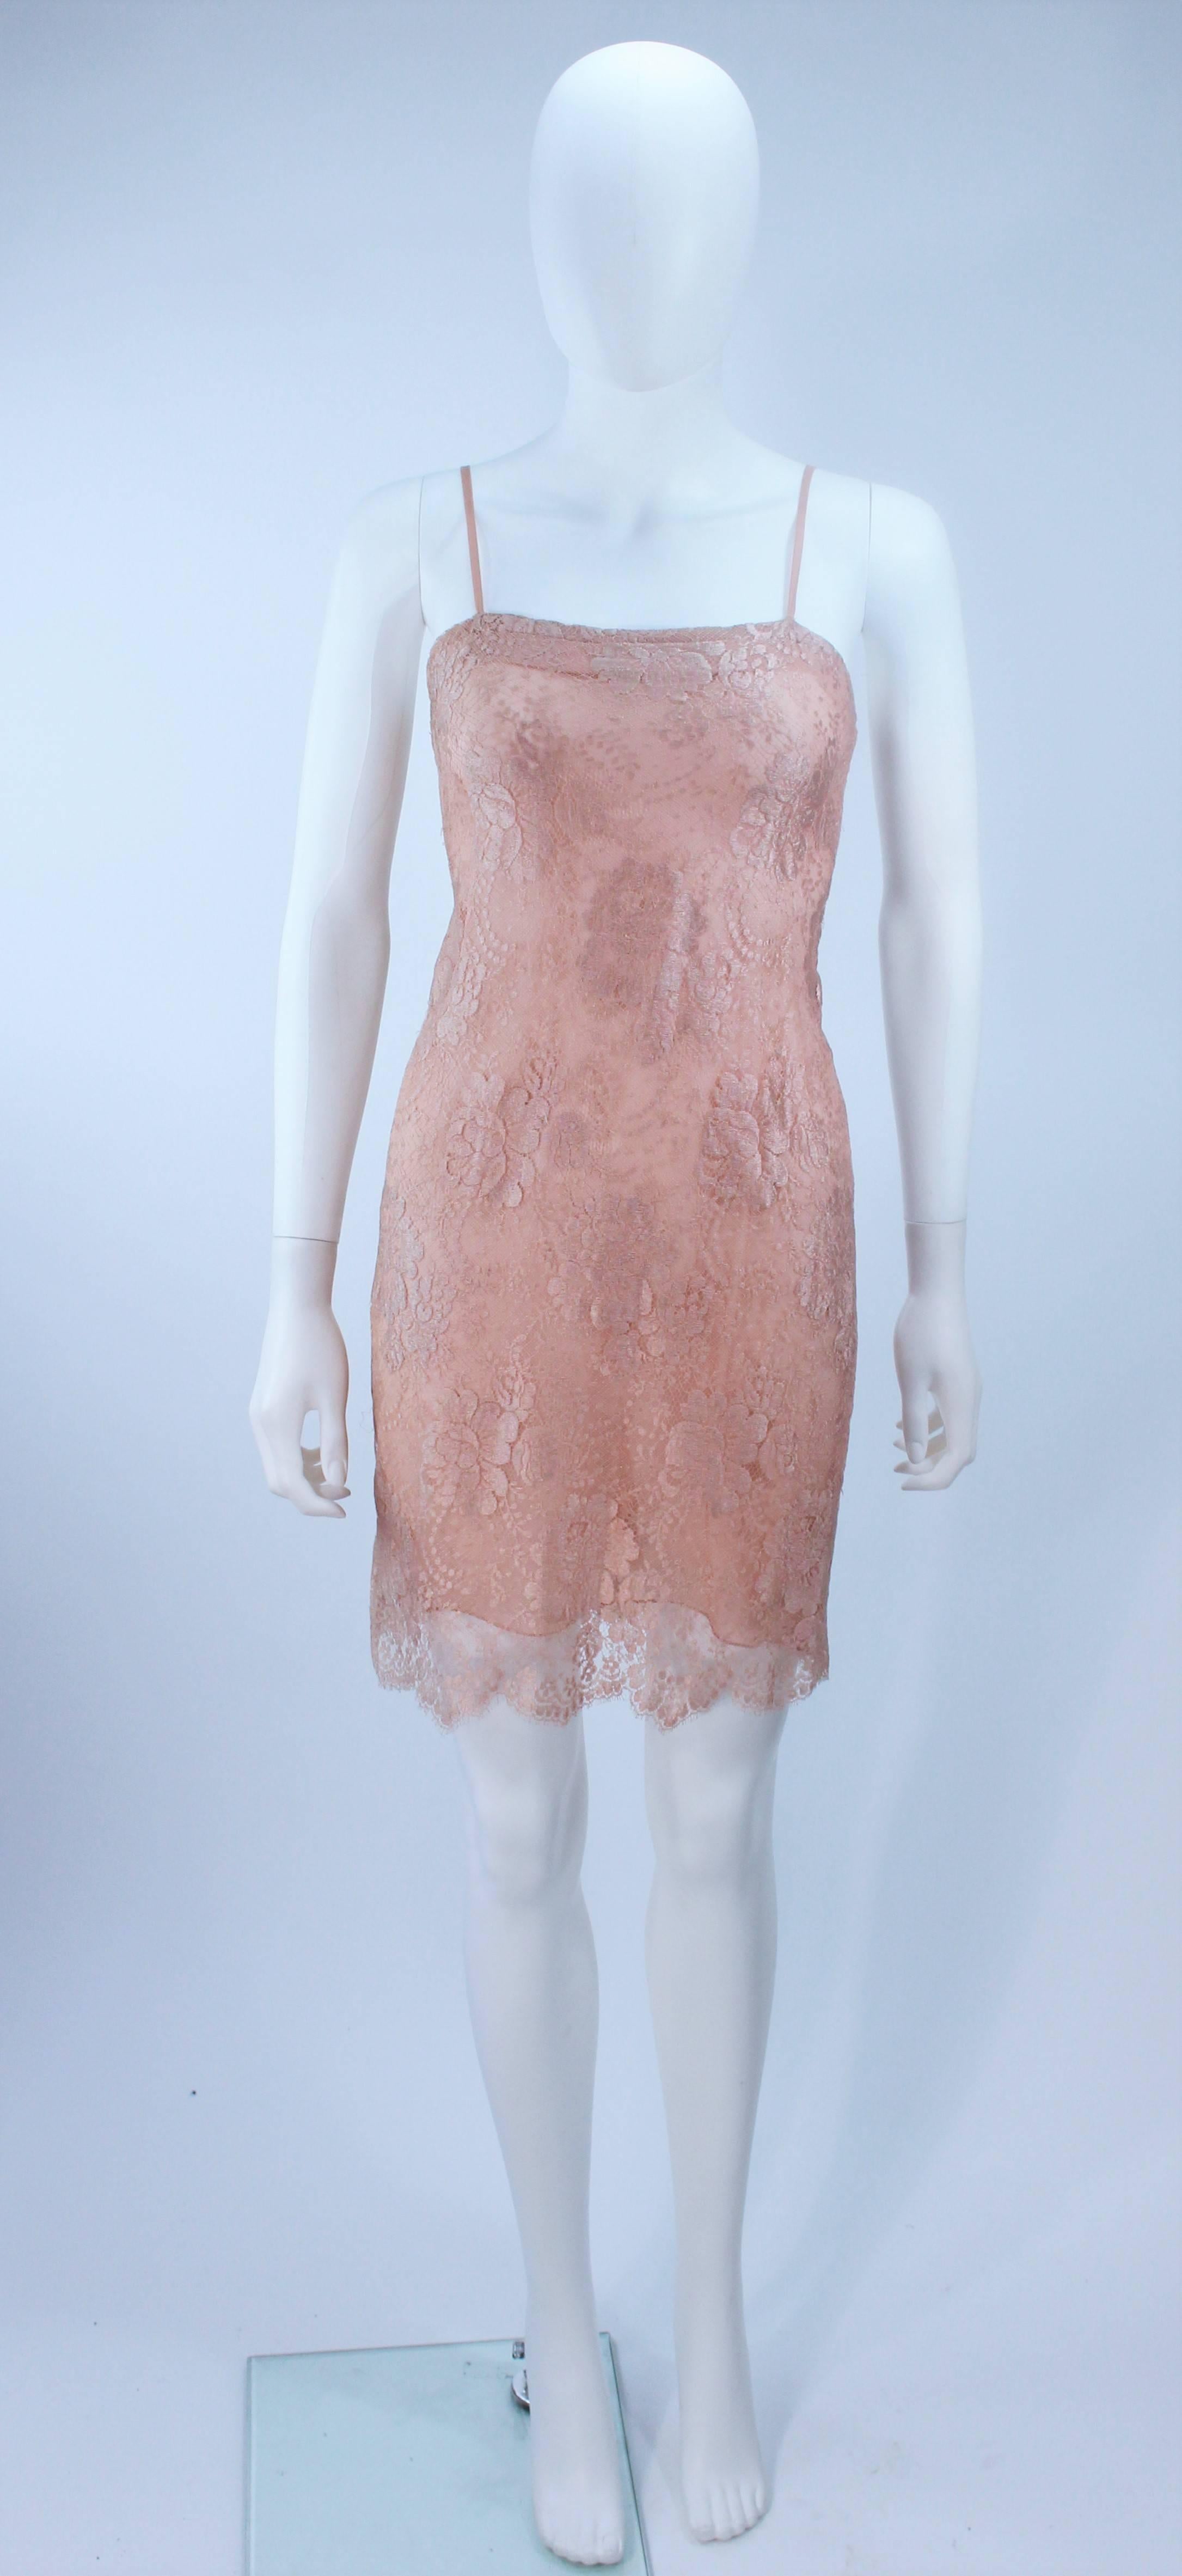 BILL BLASS Nude Peach Lace Cocktail Dress with Over Blouse Size 6 For Sale 1